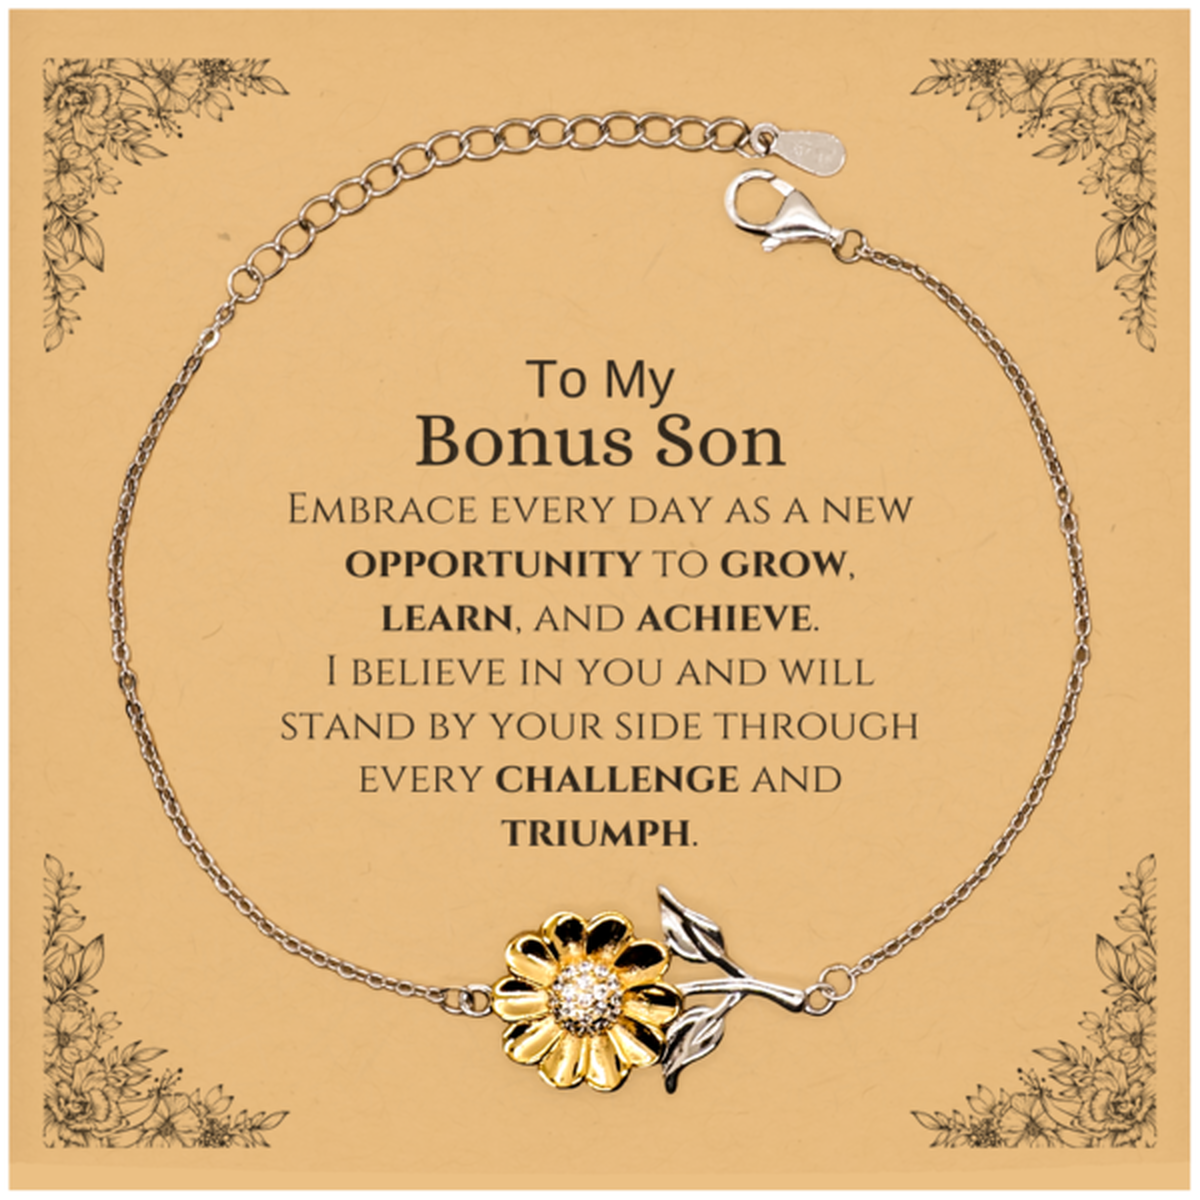 To My Bonus Son Gifts, I believe in you and will stand by your side, Inspirational Sunflower Bracelet For Bonus Son, Birthday Christmas Motivational Bonus Son Gifts